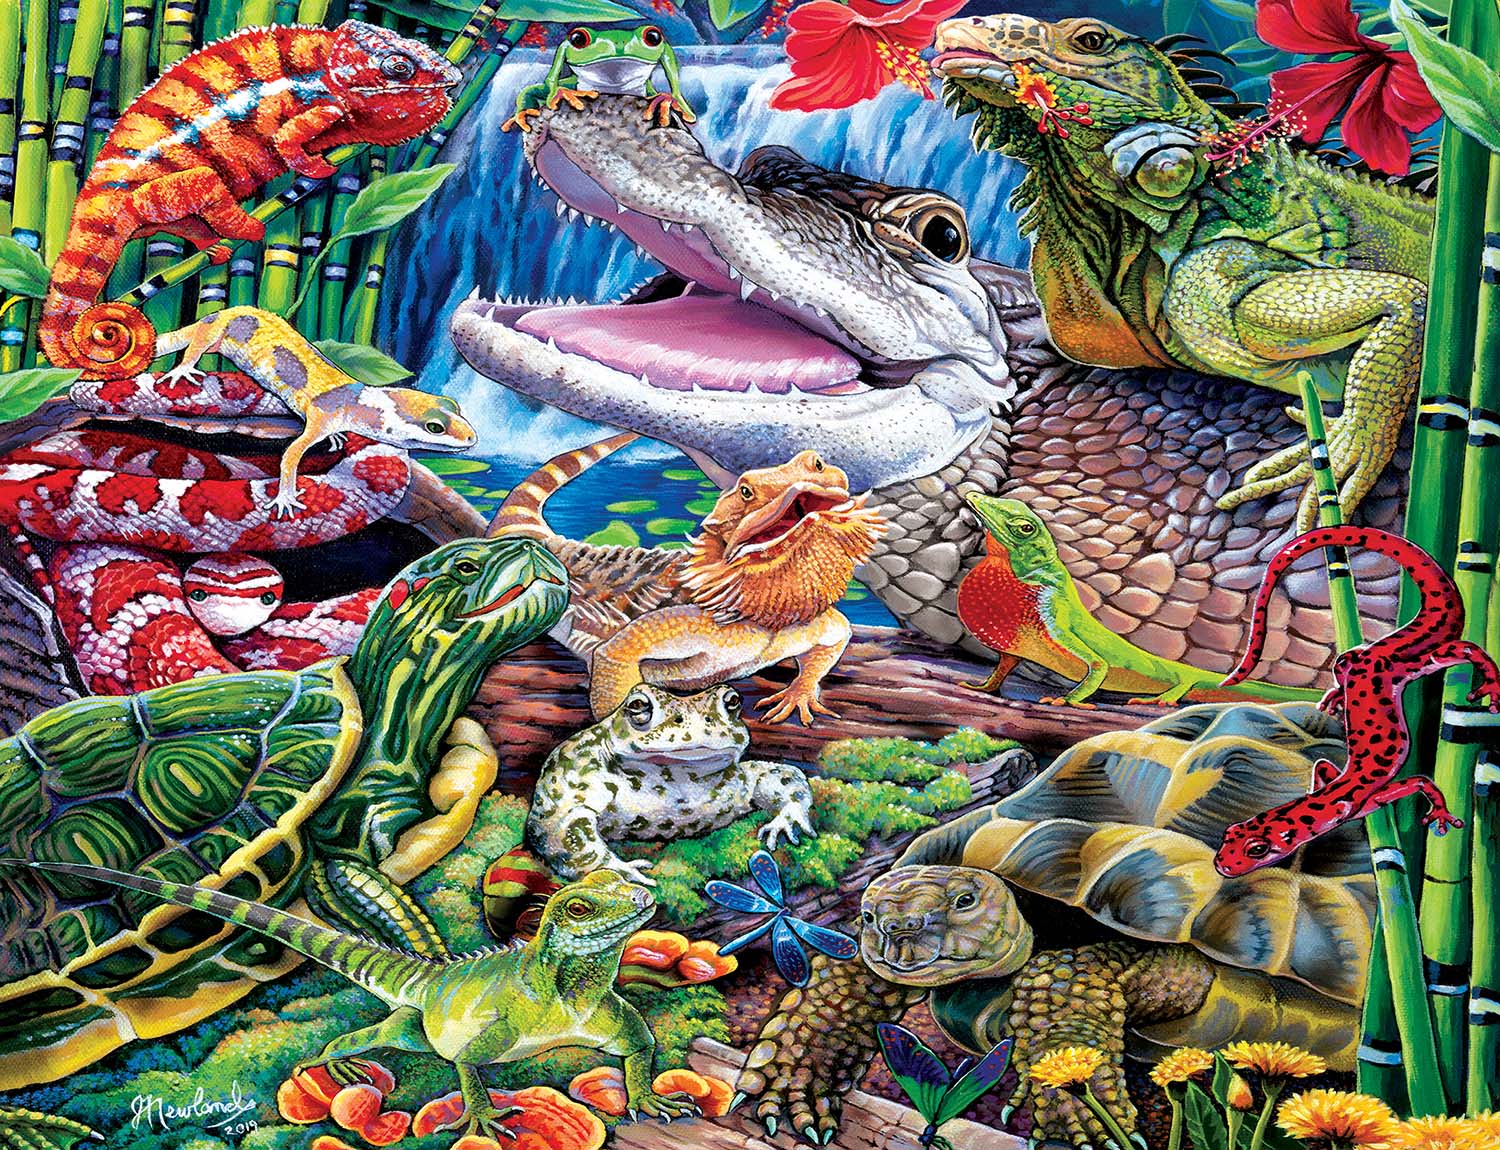 World of Animals - Reptile Friends Animals Jigsaw Puzzle